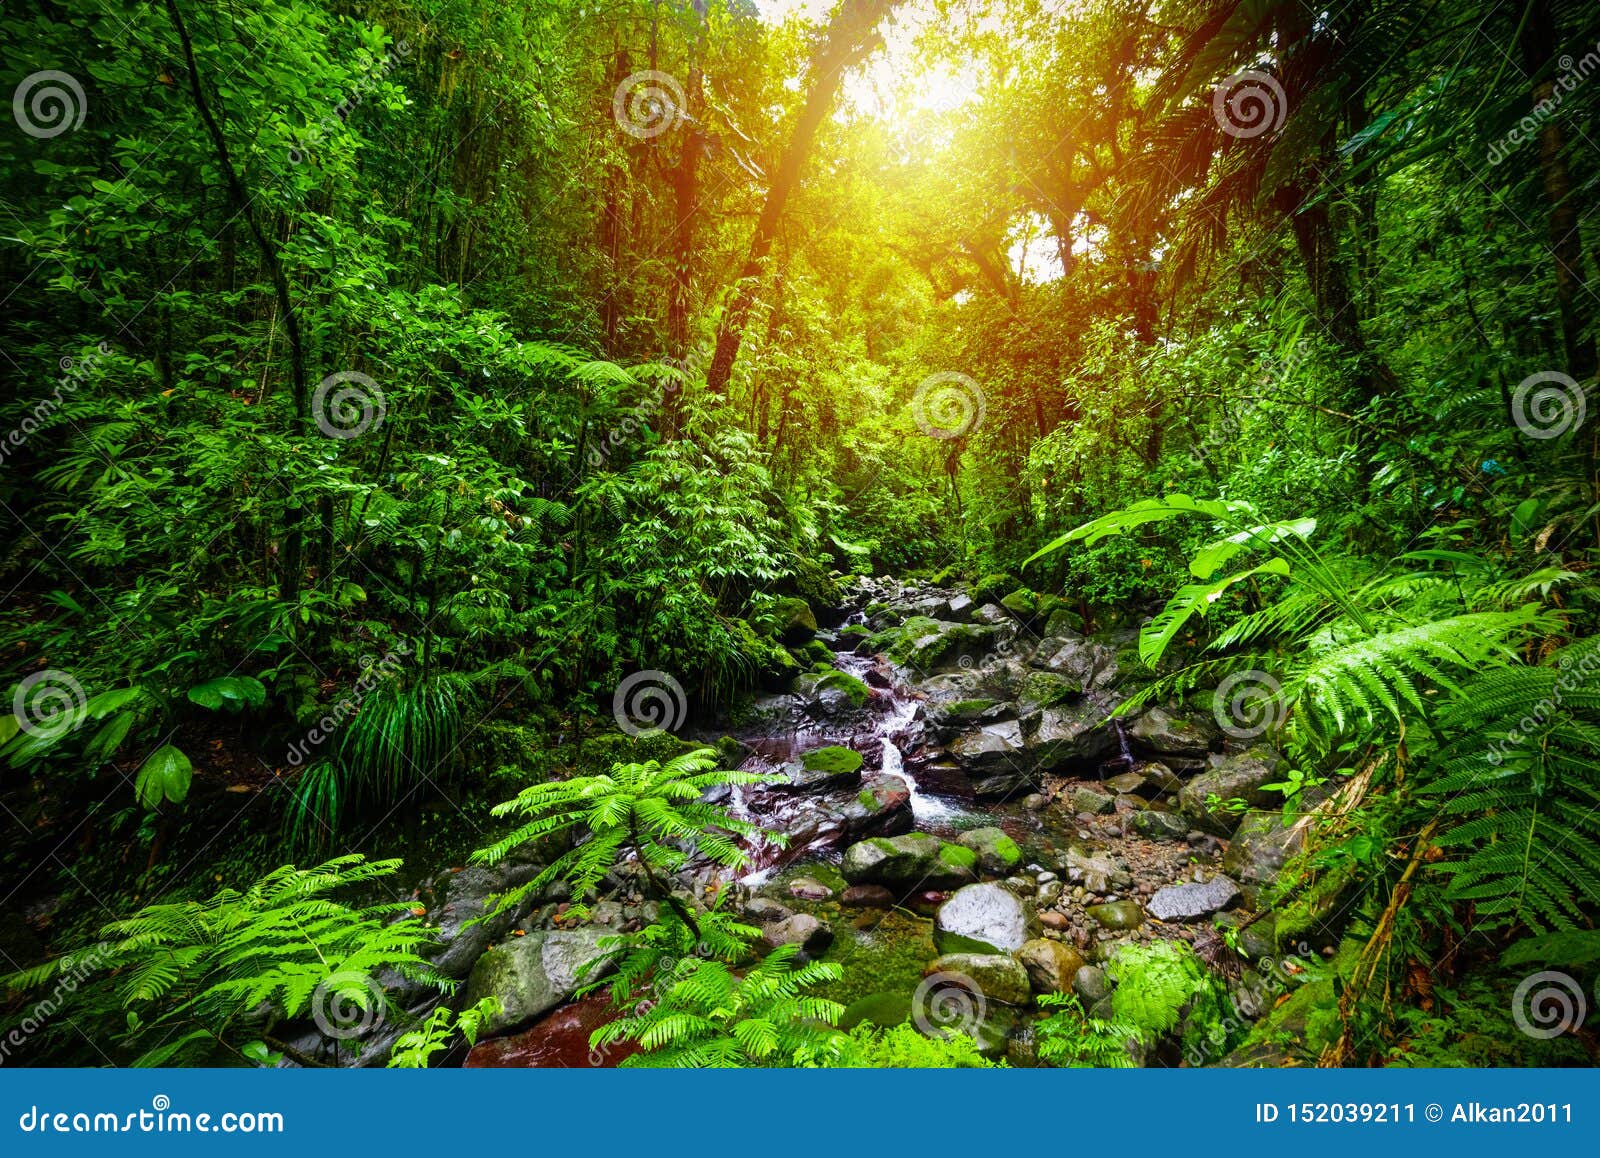 small stream in guadeloupe jungle at sunset